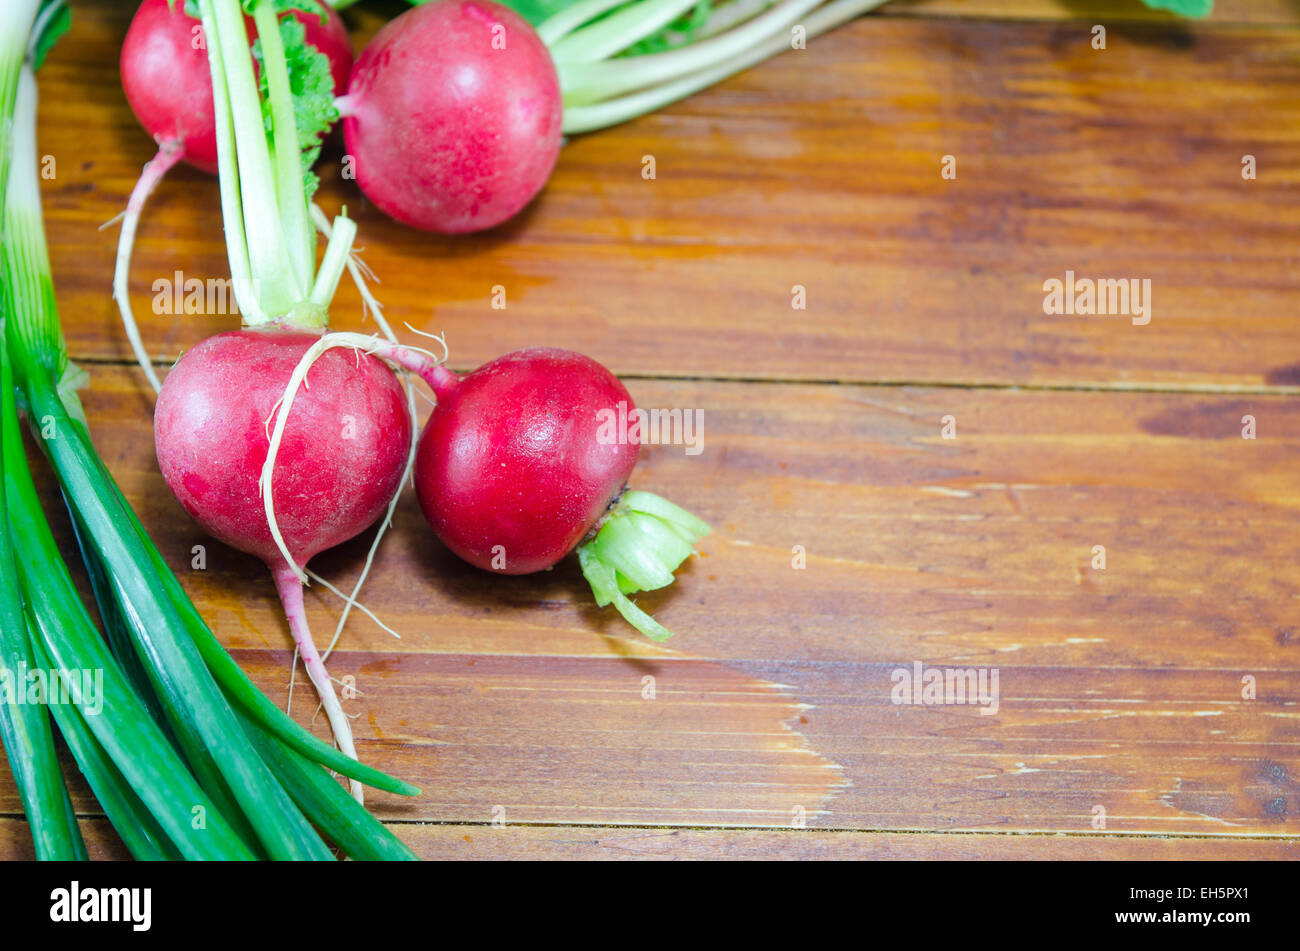 Fresh and moist radishes on a wooden table Stock Photo